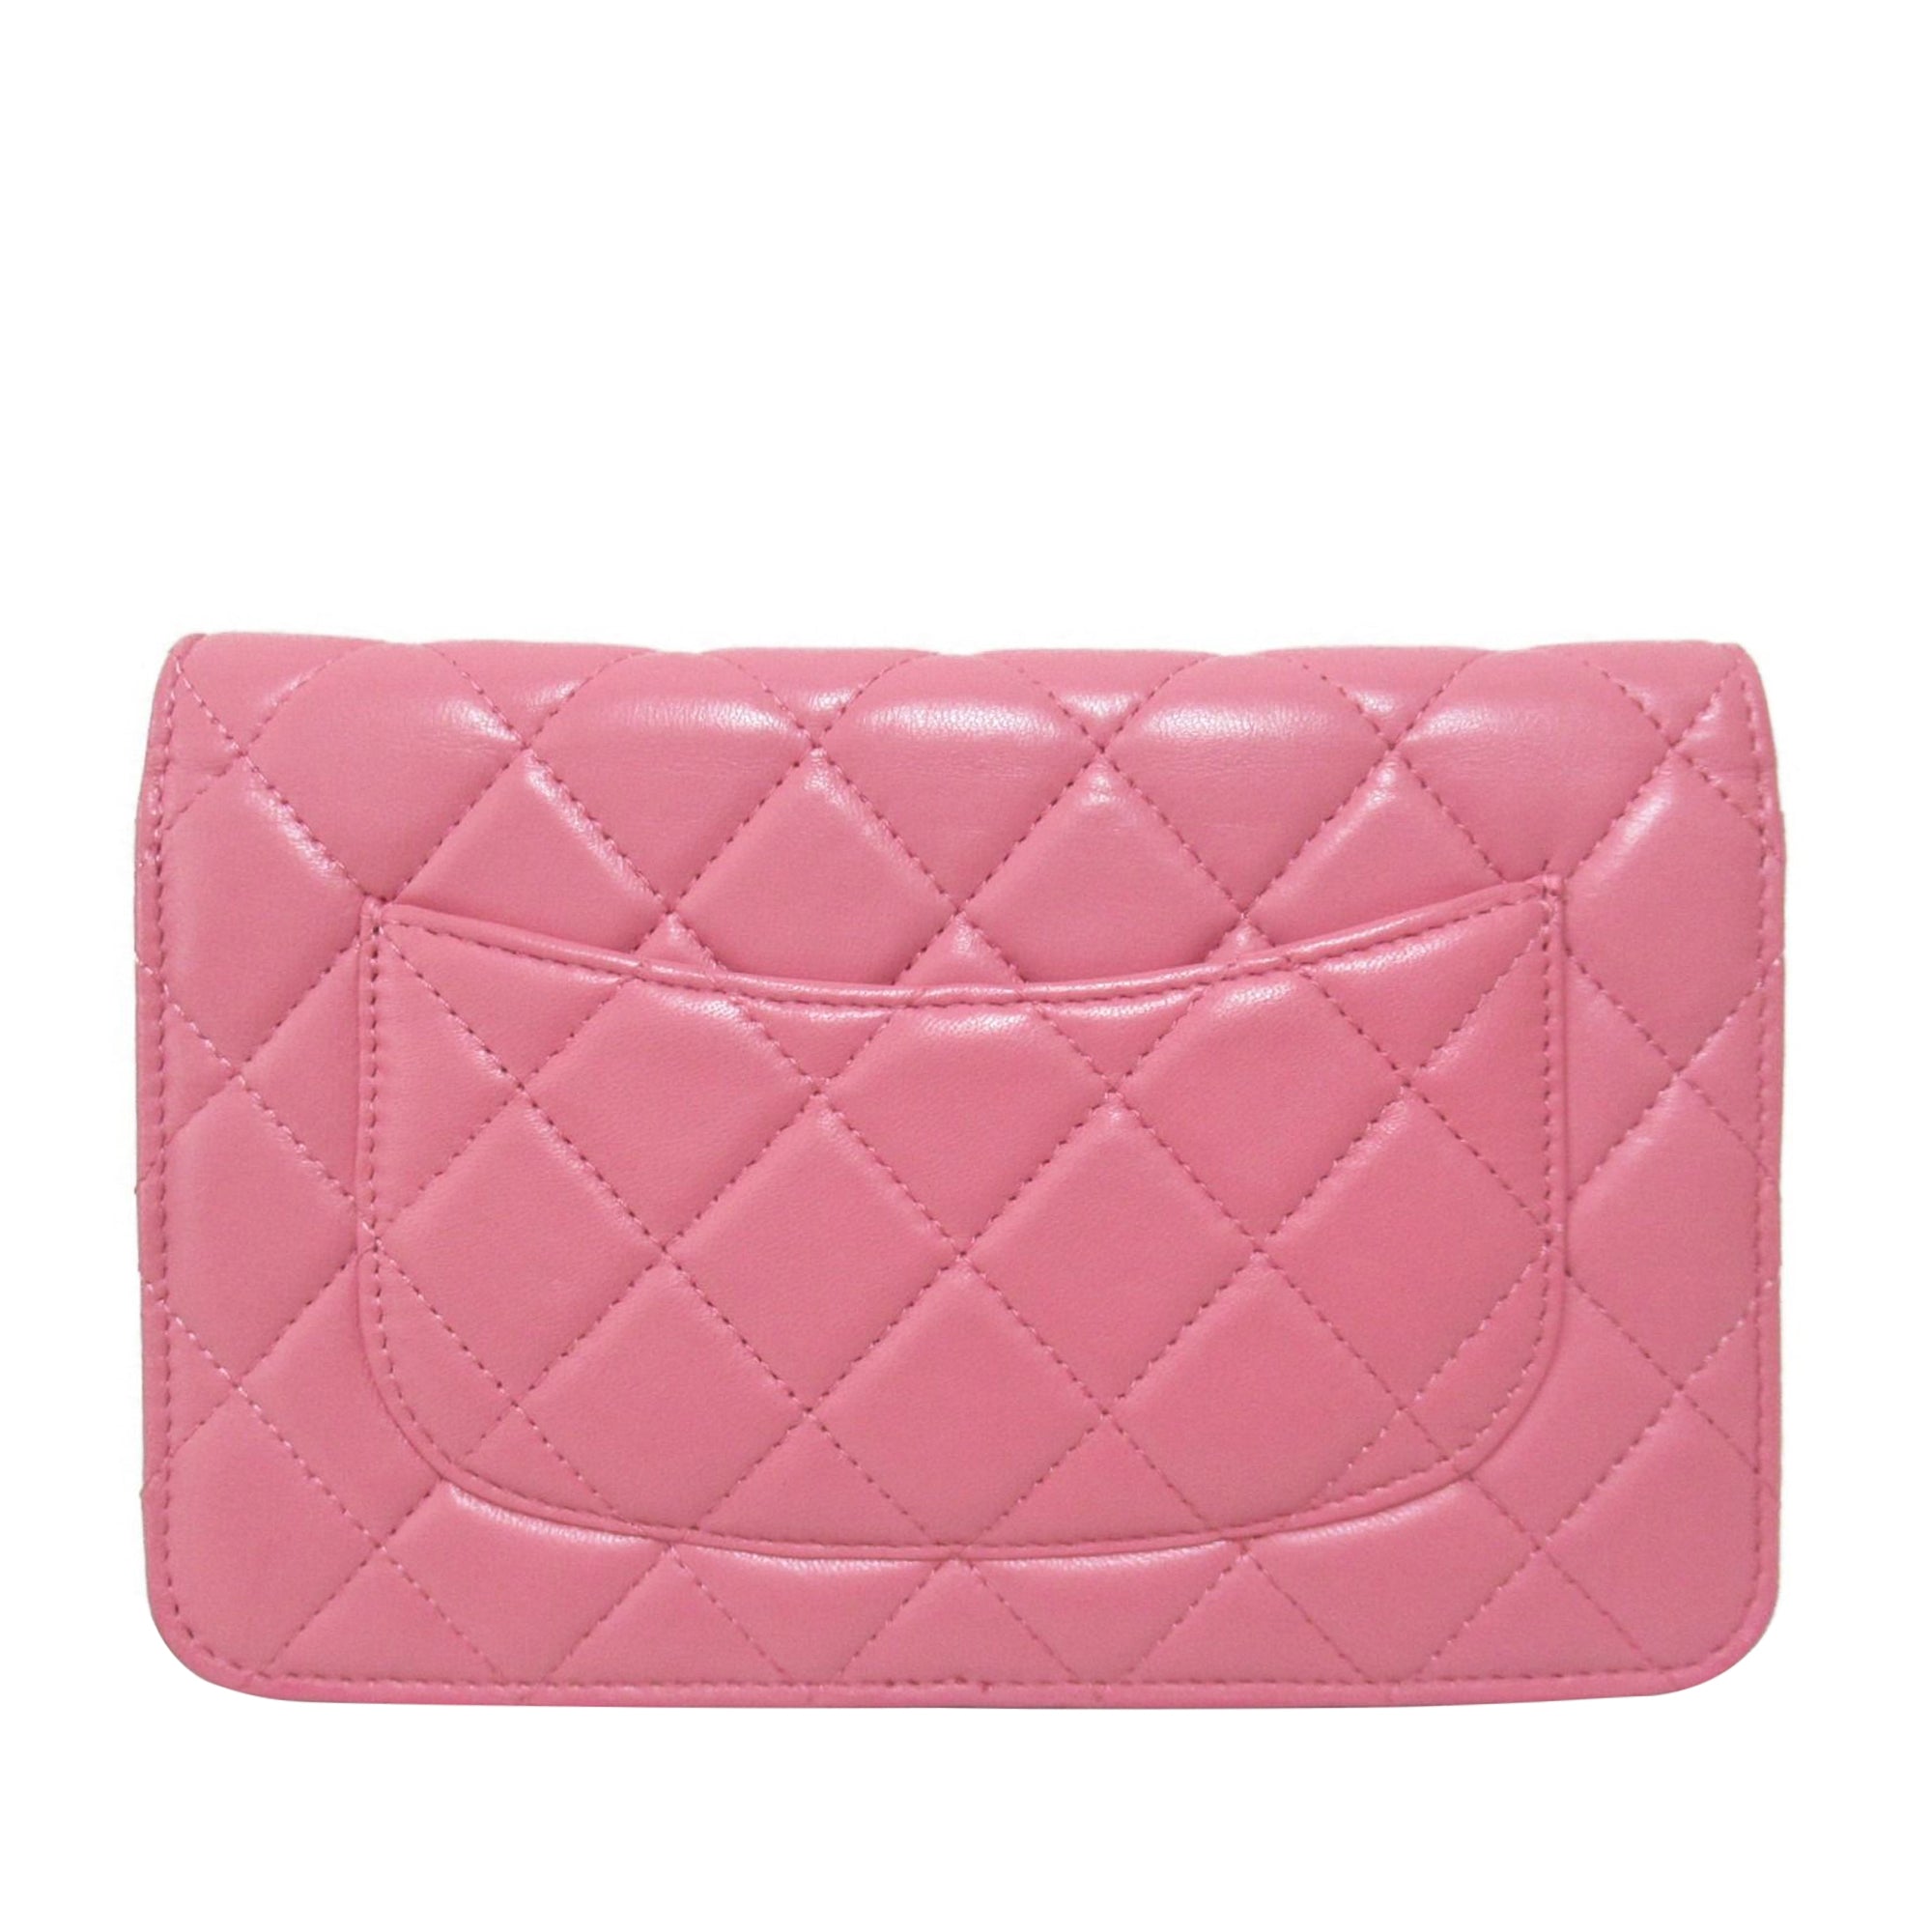 Pink Chanel CC Wallet On Chain Crossbody Bag